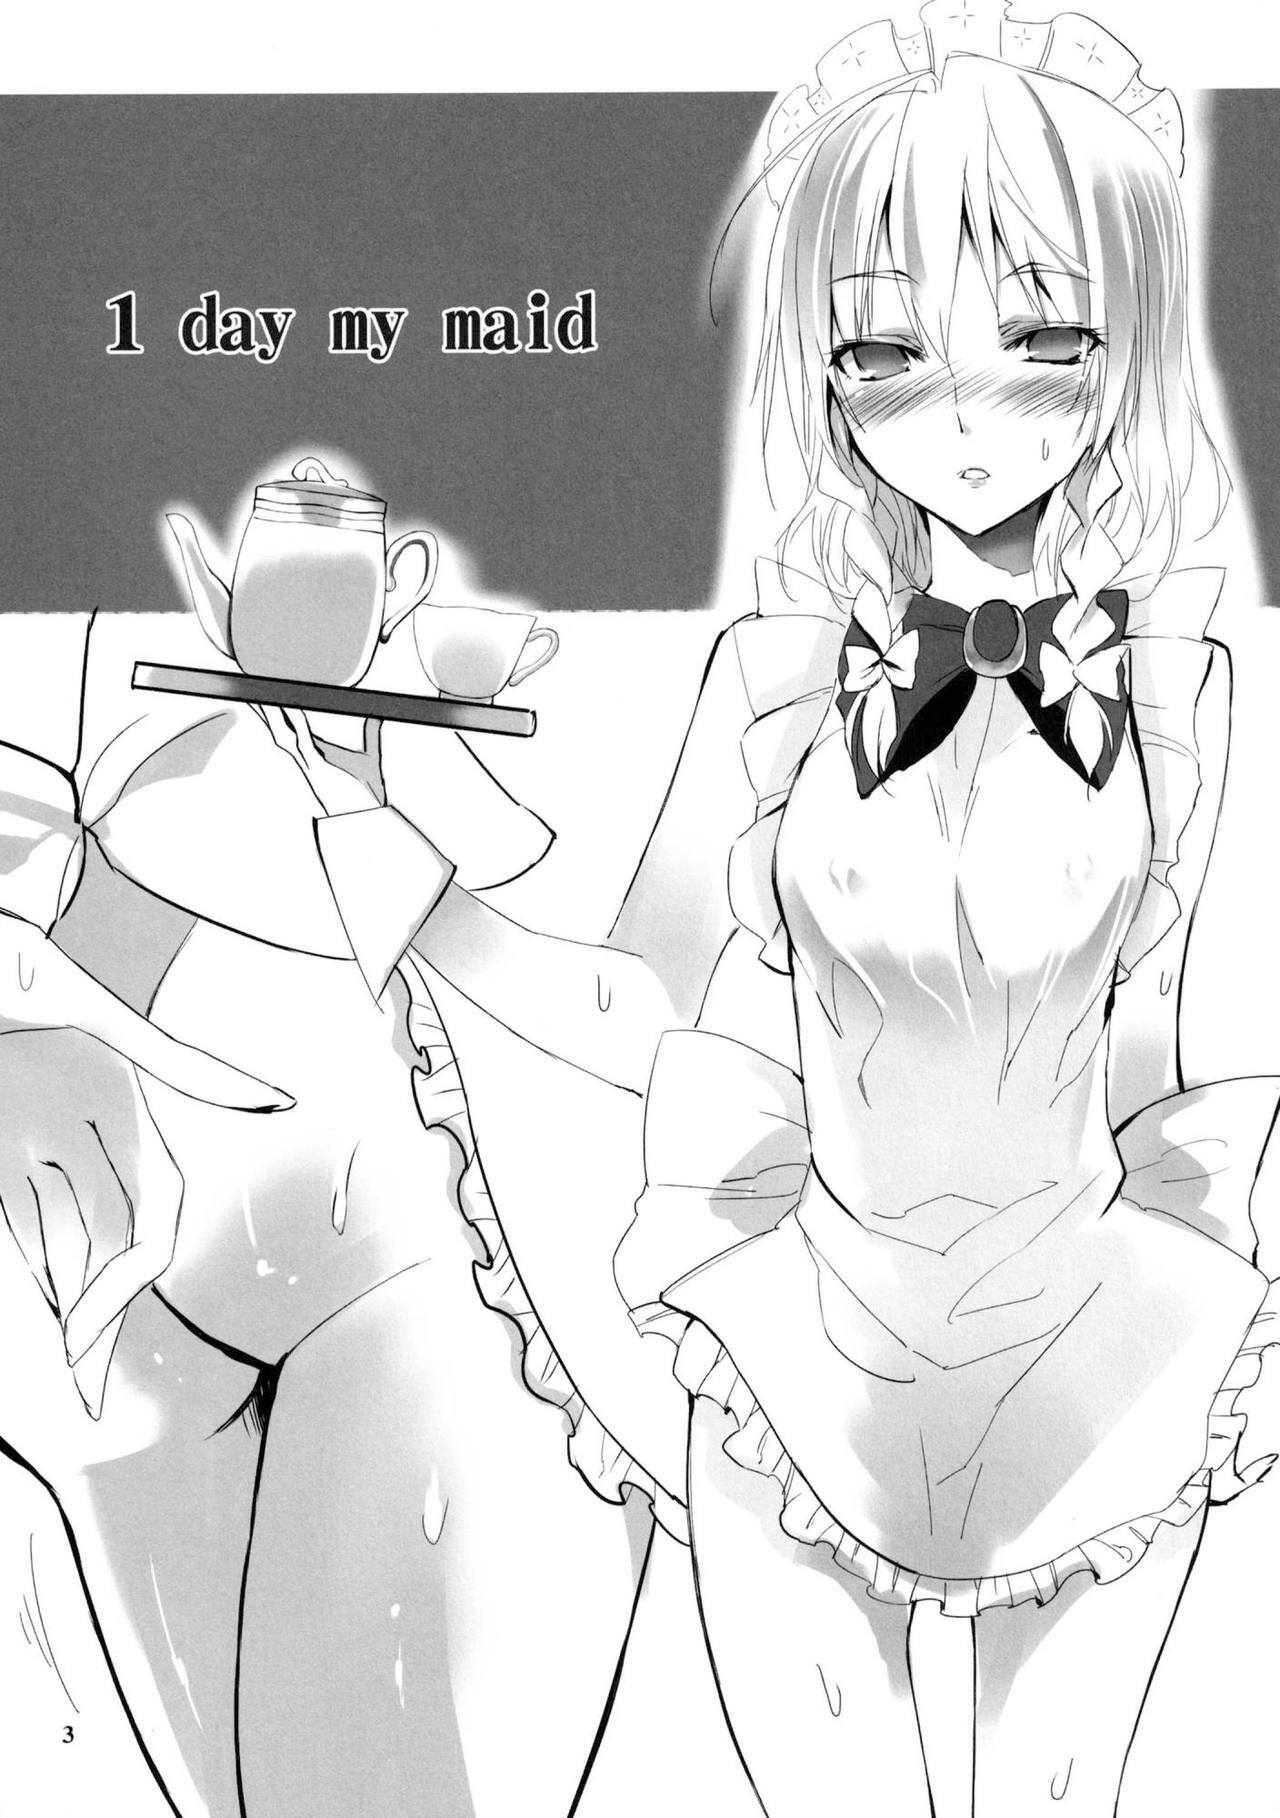 (Touhou Kamuisai 4) [KOTI (A Toshi)] 1 day my maid (Touhou Project) page 3 full